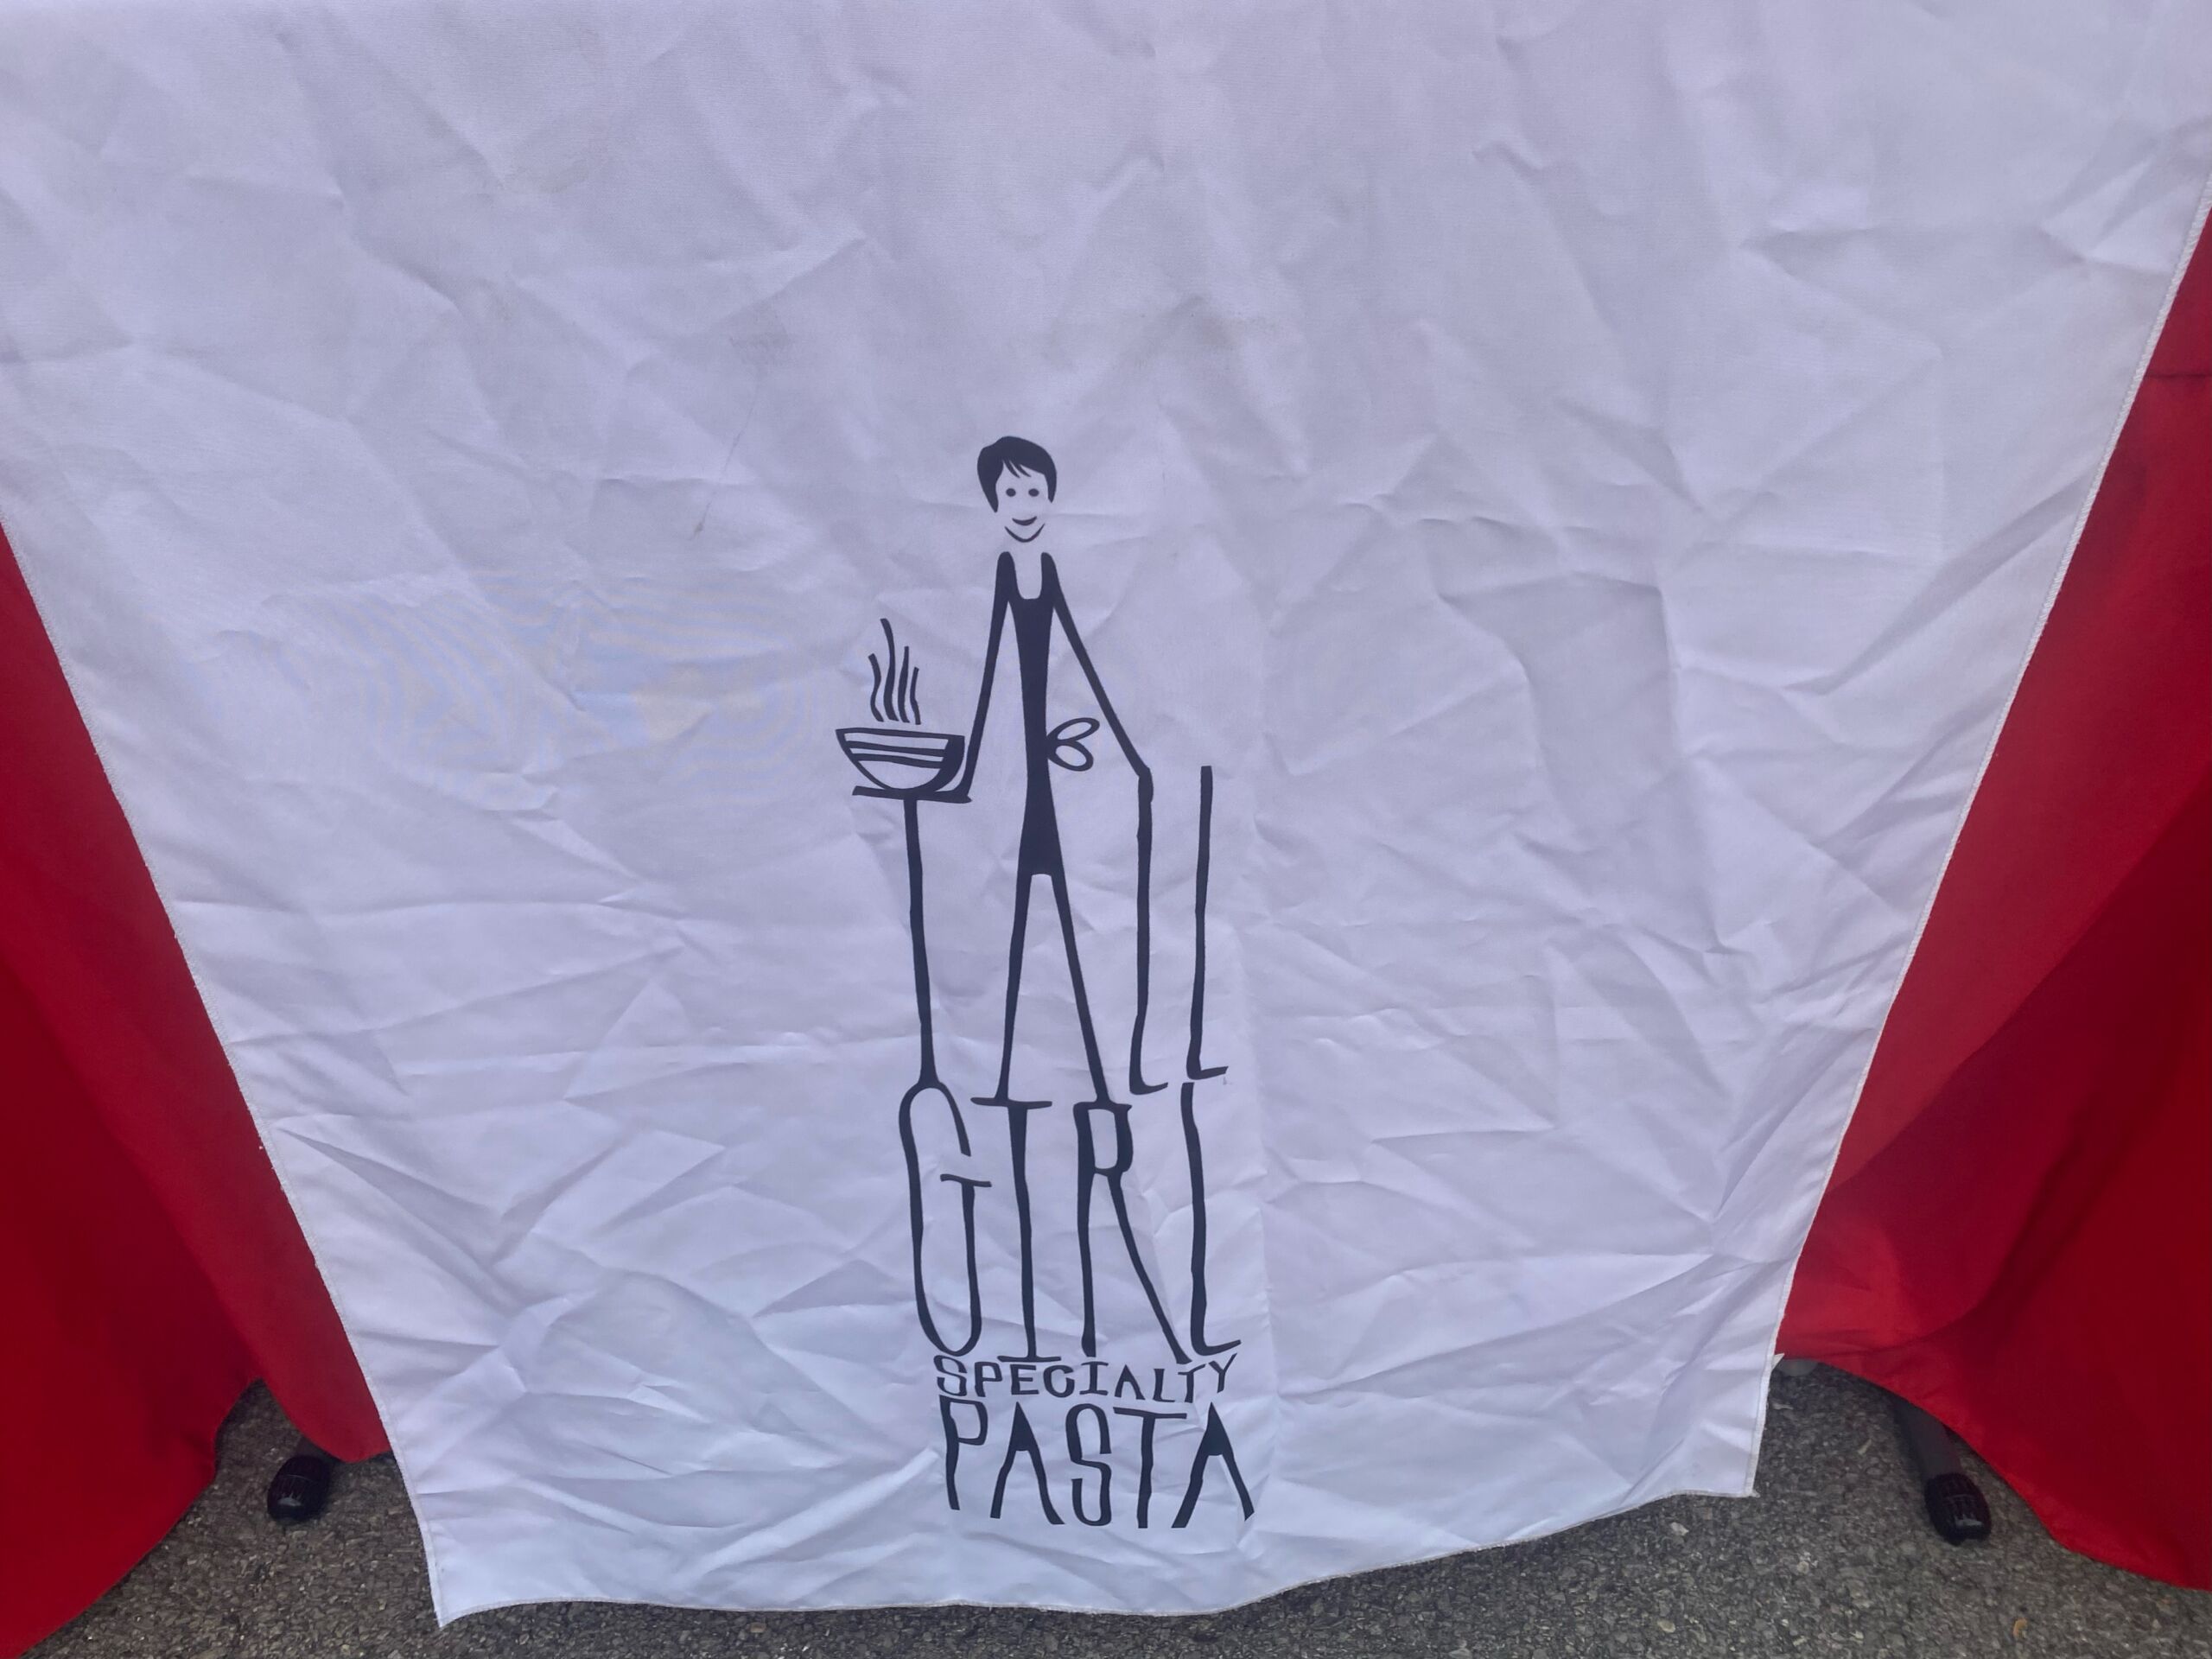 Table cloth that says "tall girl specialty pasta"